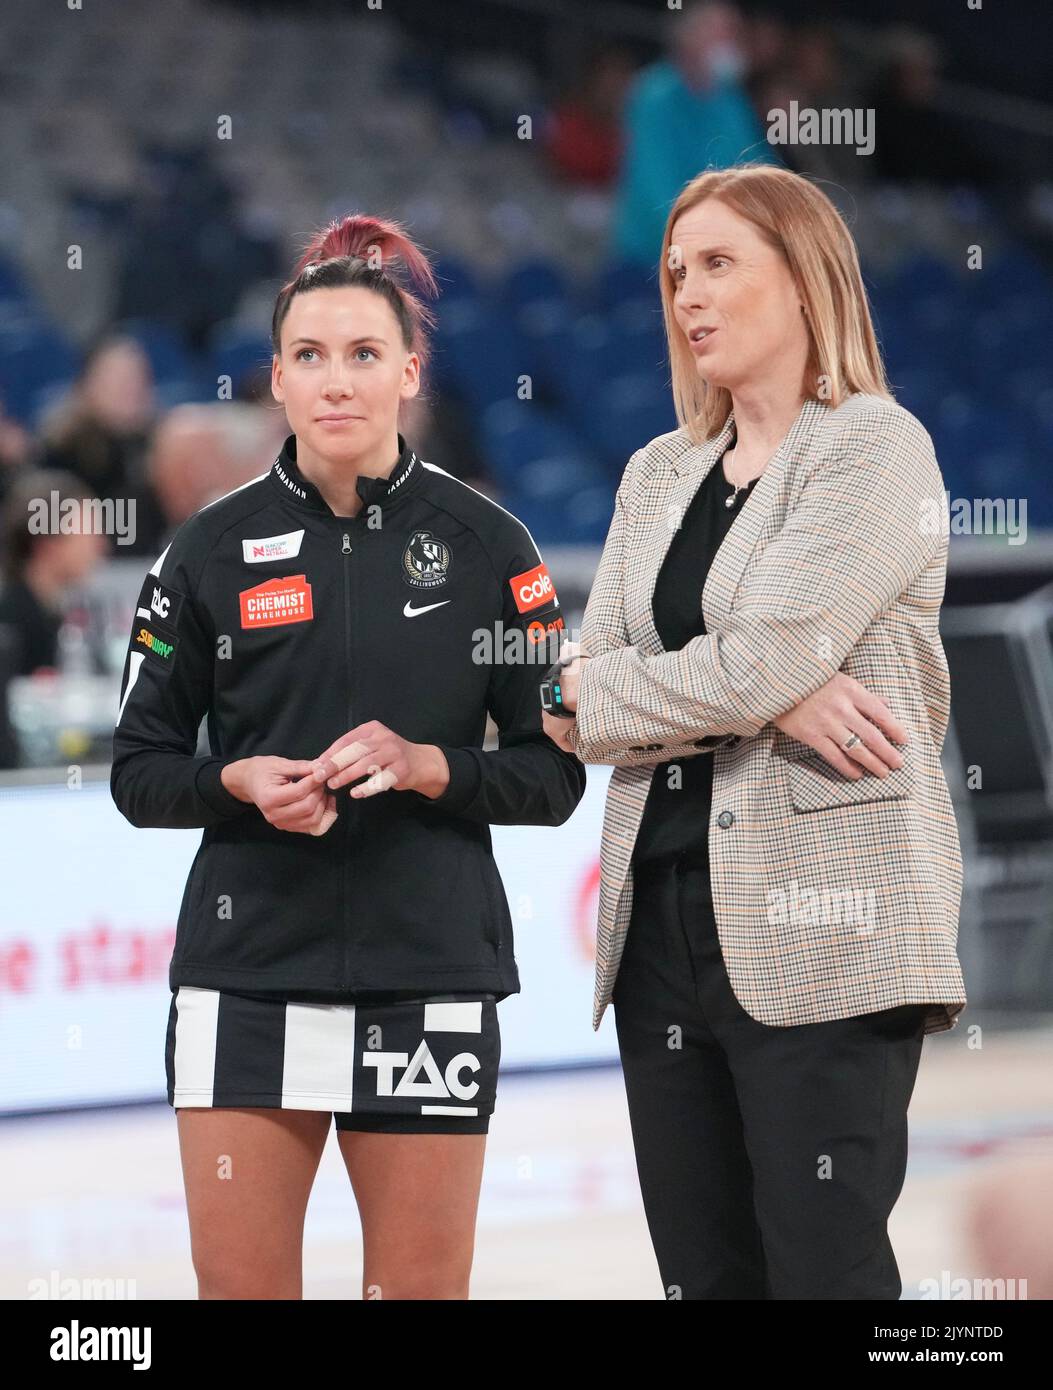 Kelsey Browne of the Magpies and Nicole Richardson, coach of the Magpies  talk before the Round 3 Super Netball match between the Collingwood Magpies  and Adelaide Thunderbirds at John Cain Arena in